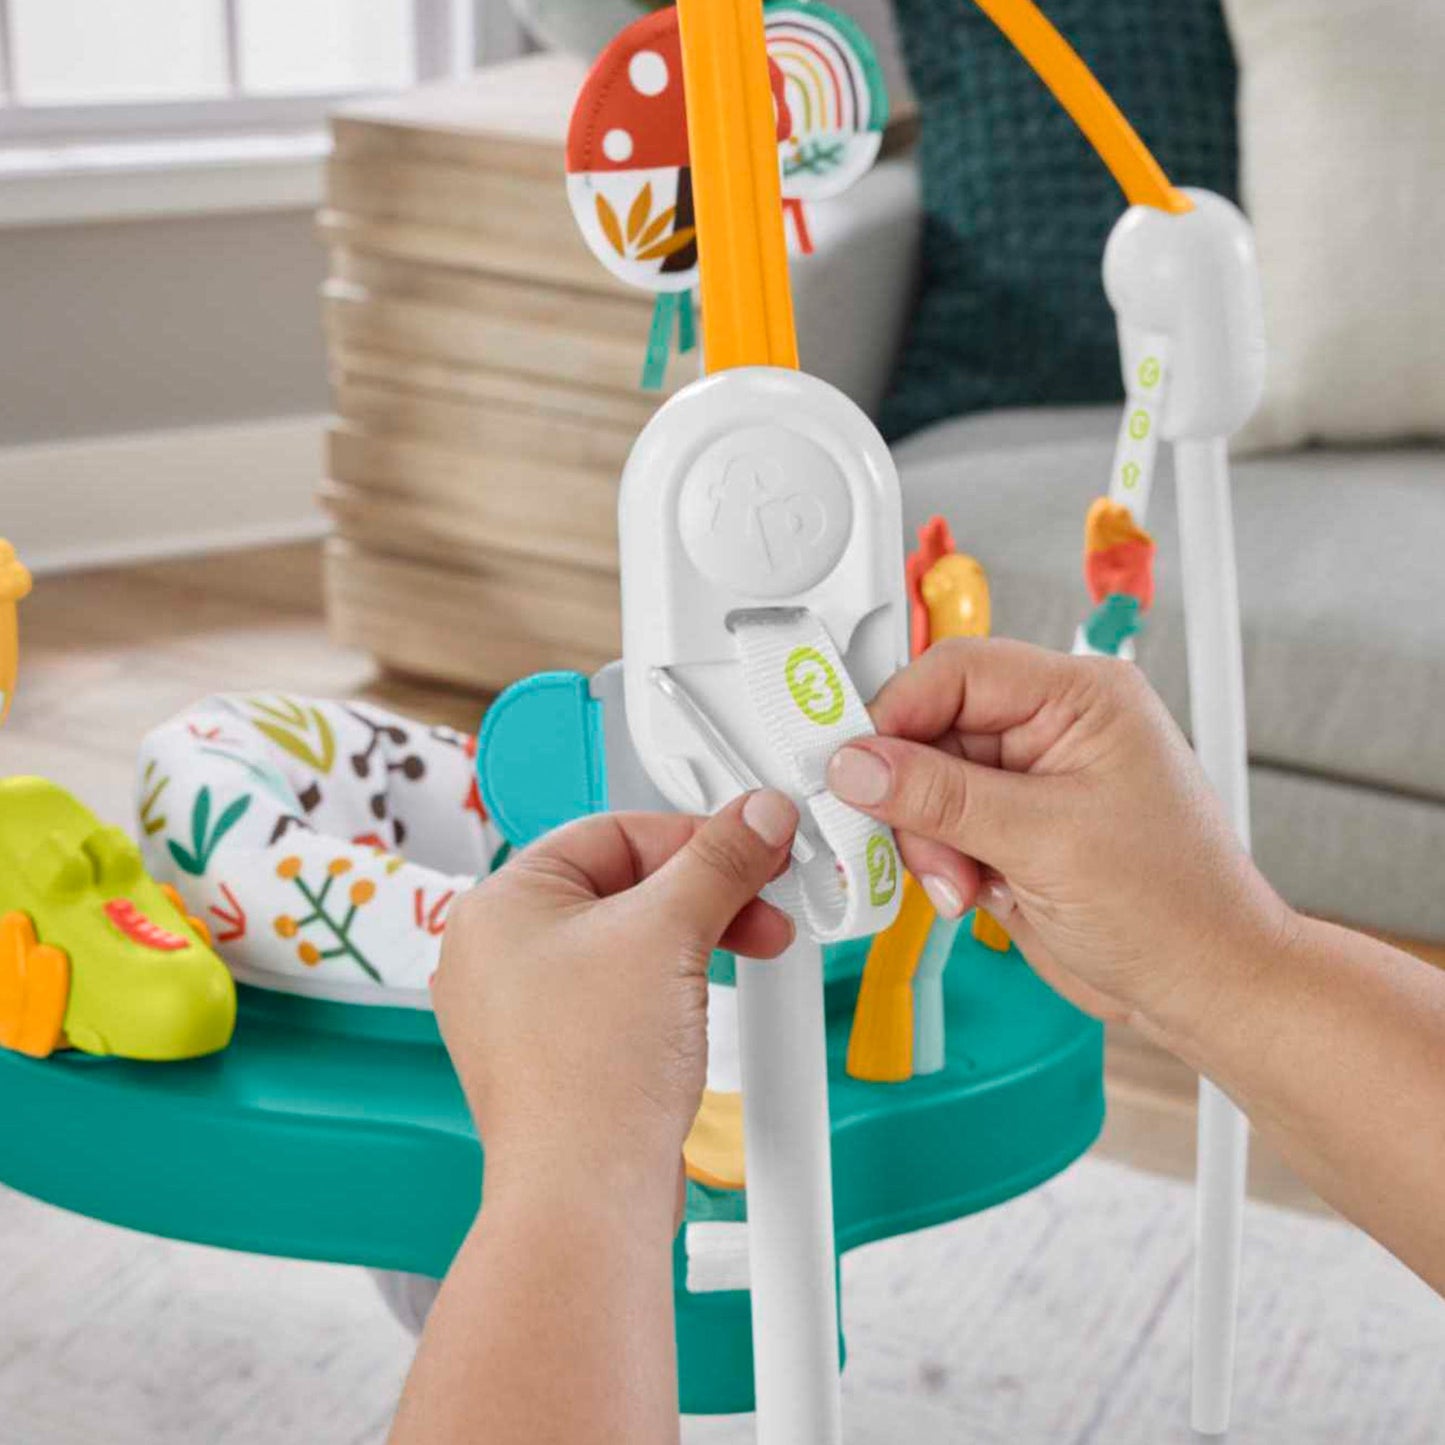 Fisher-Price Whimsical Forest Jumperoo